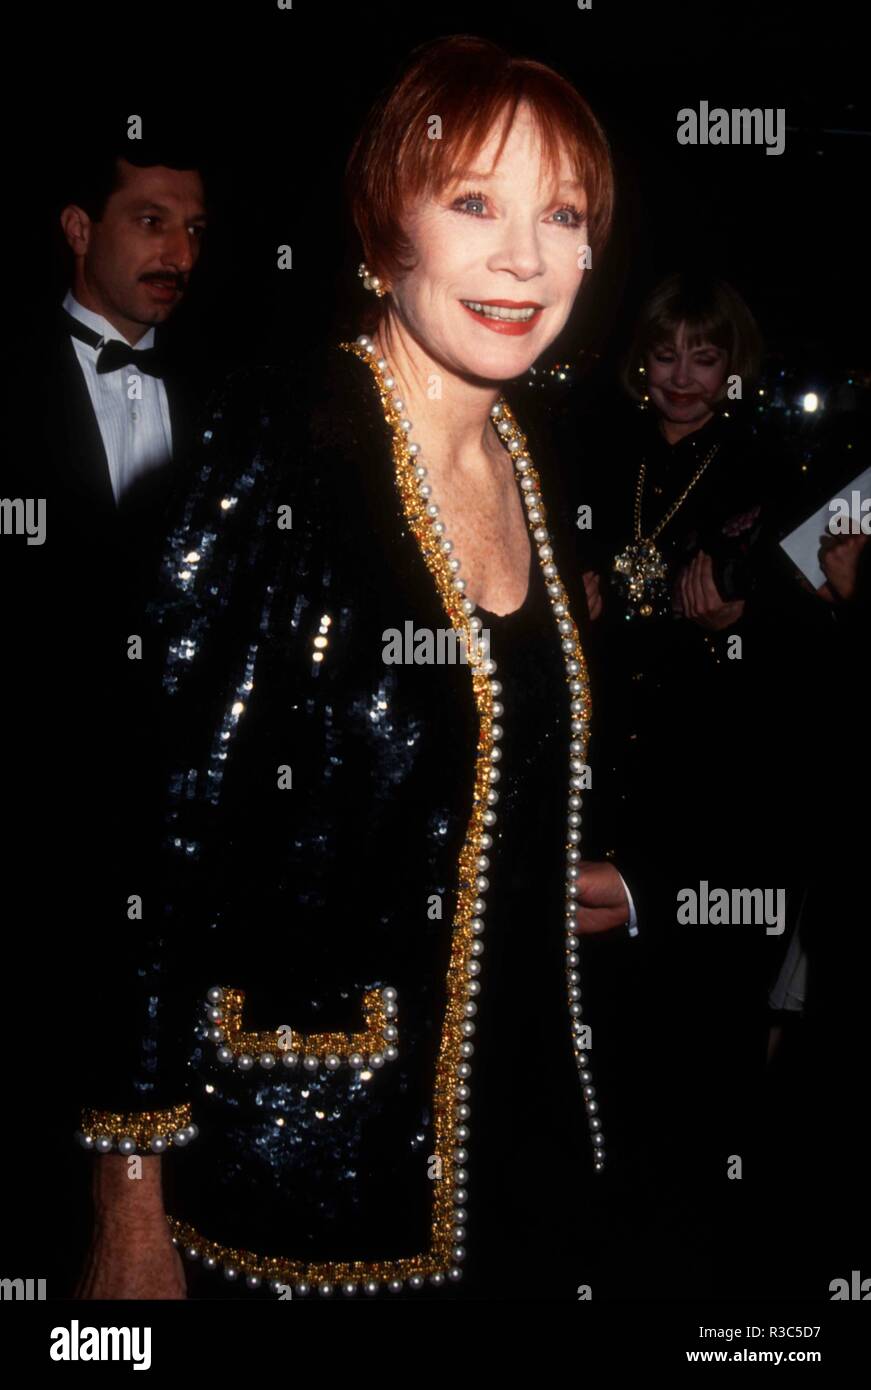 BEVERLY HILLS, CA - JANUARY 29: Actress Shirley MacLaine attends The Daily Variety Salutes Army Archerd on January 29, 1993 at the Beverly Hilton Hotel in Beverly Hills, California. Photo by Barry King/Alamy Stock Photo Stock Photo